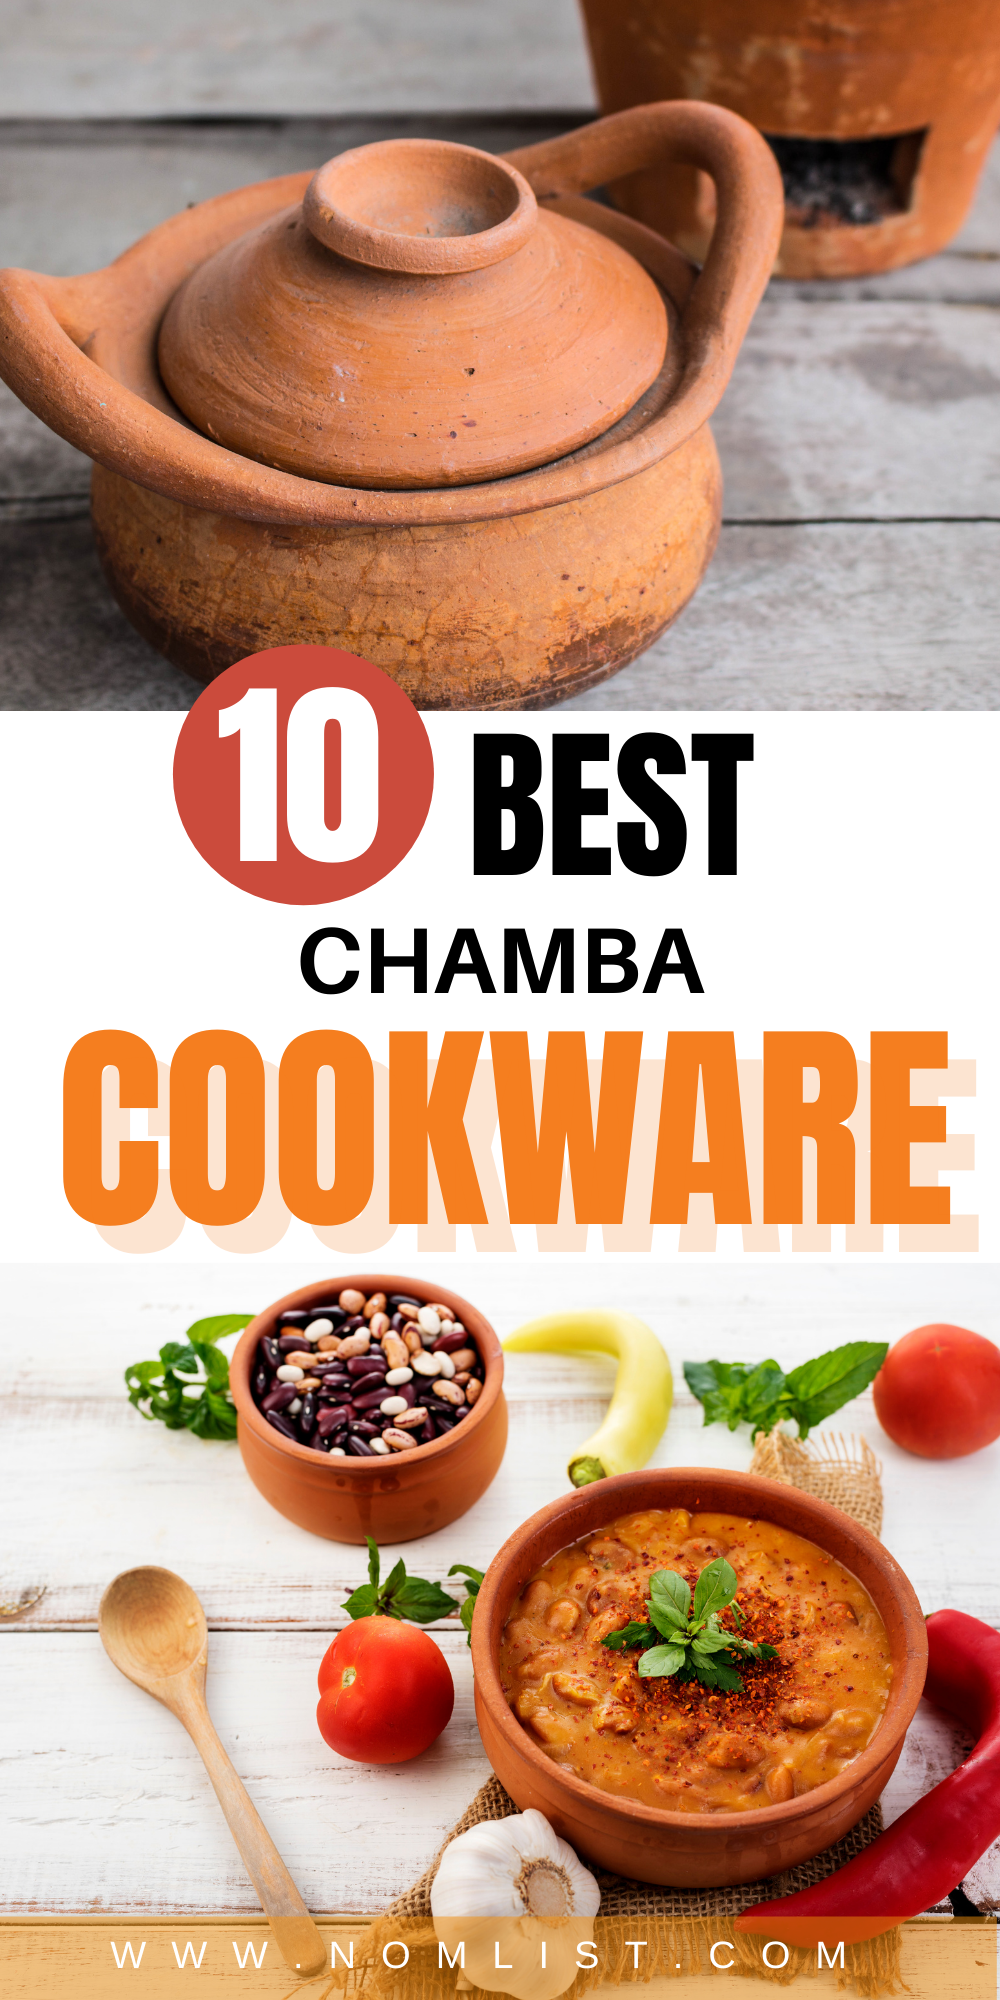 What the heck is a Chamba cookware? You probably heard about clay or metal cookware but never Chamba. Well Chamba is actually just another name for a cookware that is made with clay but this one is a little more special. It is traditionally made by the people of Colombia and is basically a necessity if you want to make traditional Colombia food. Check out the best Chamba clay cookware on the market!